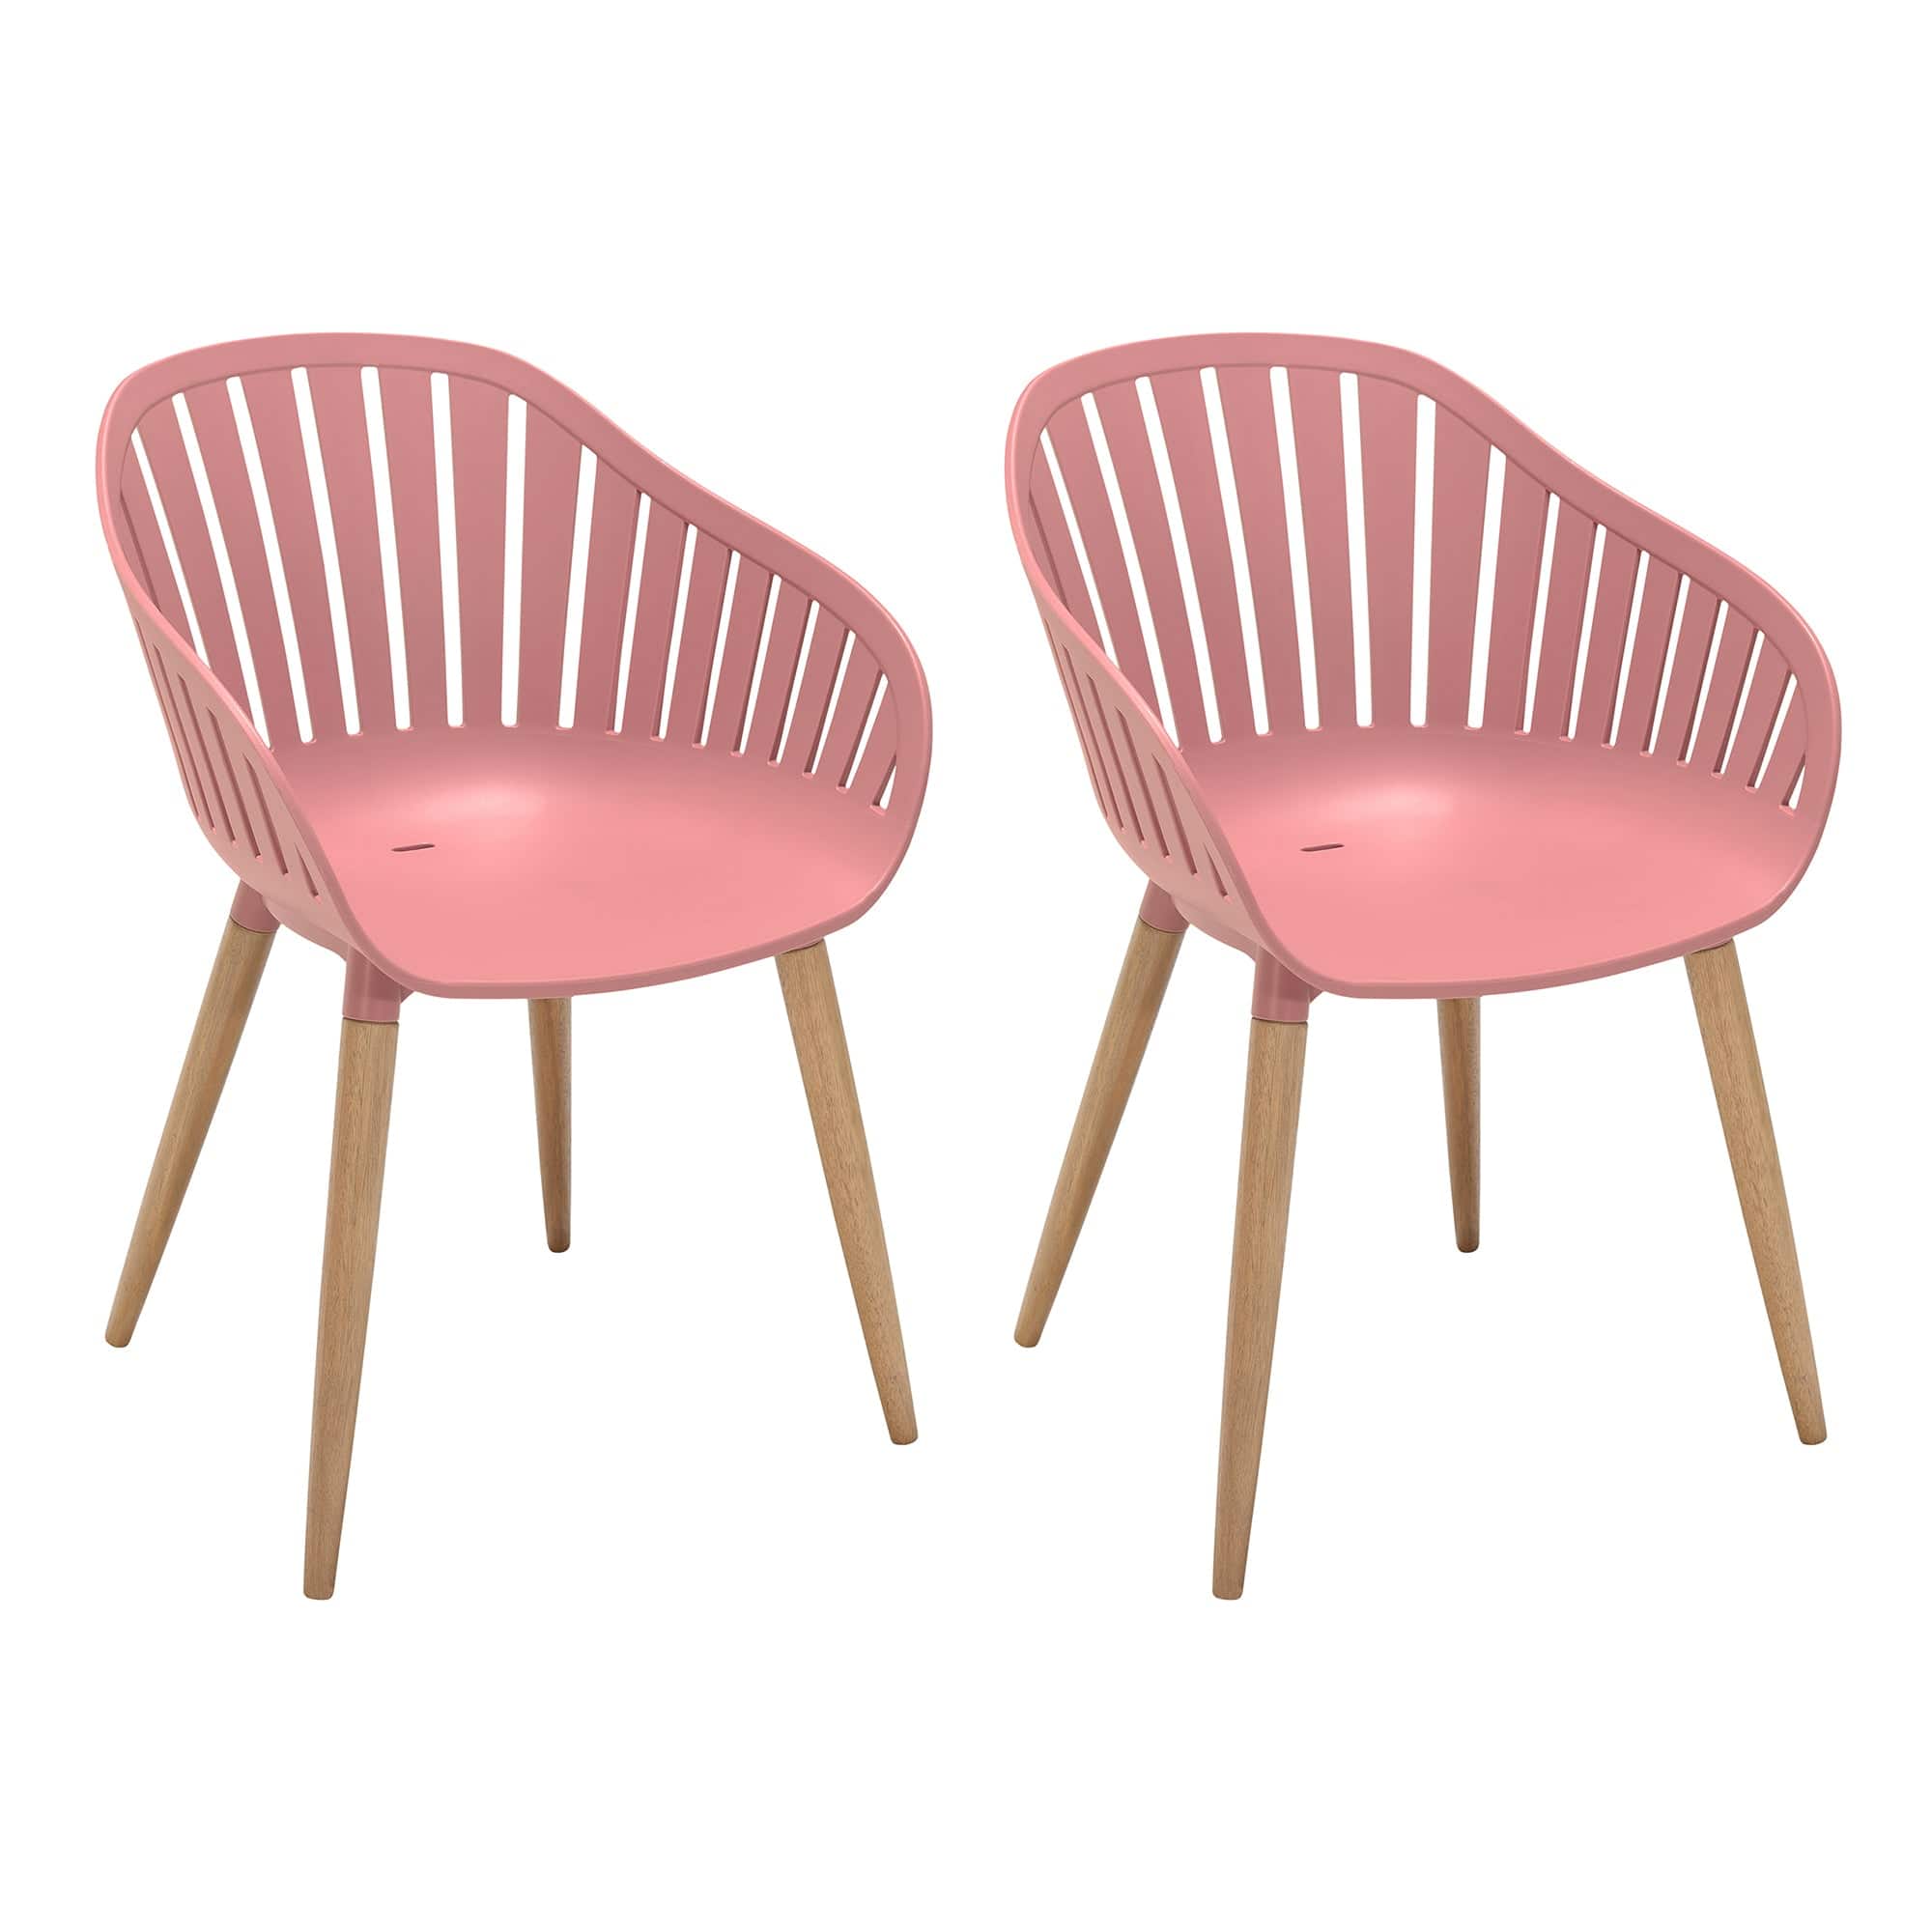 Armen Living Outdoor Dining Chair Pink Peony Armen Living | Nassau Outdoor Arm Dining Chairs with Wood legs- Set of 2 | LCNACH